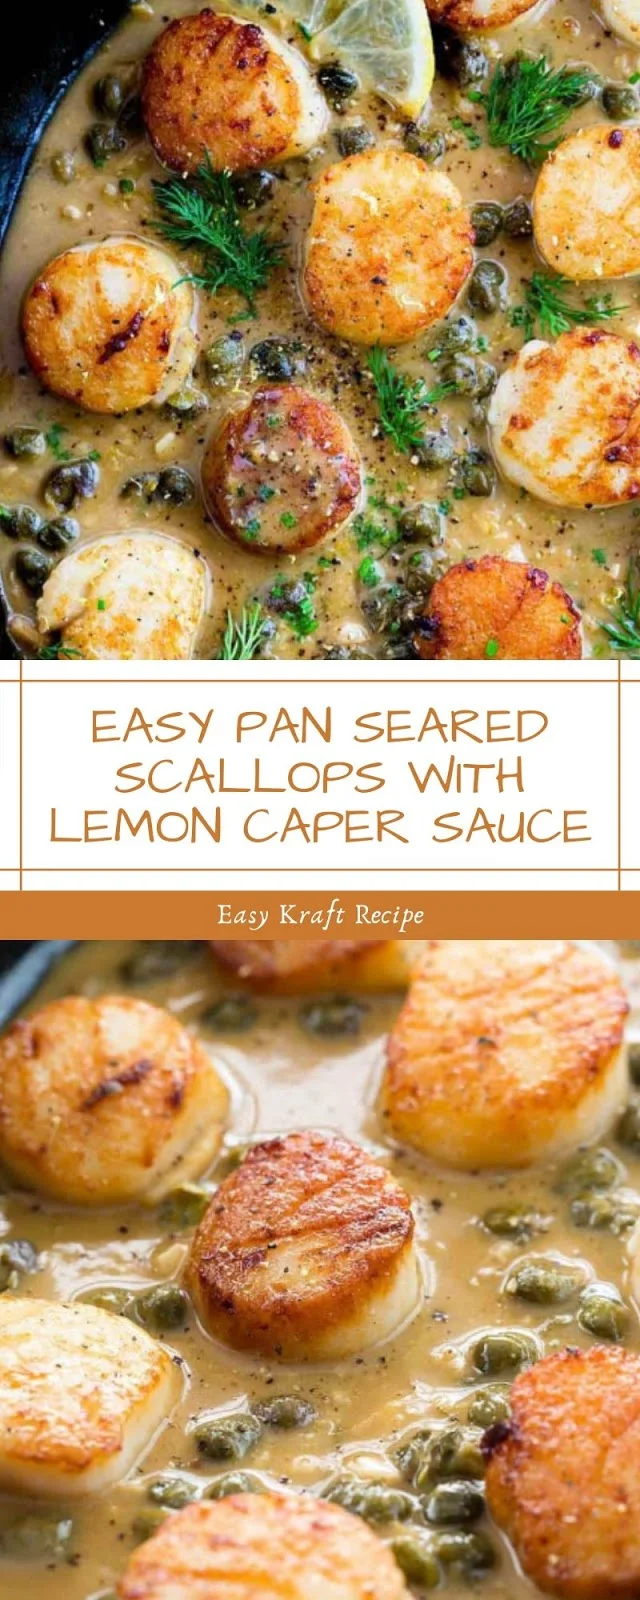 EASY PAN SEARED SCALLOPS WITH LEMON CAPER SAUCE